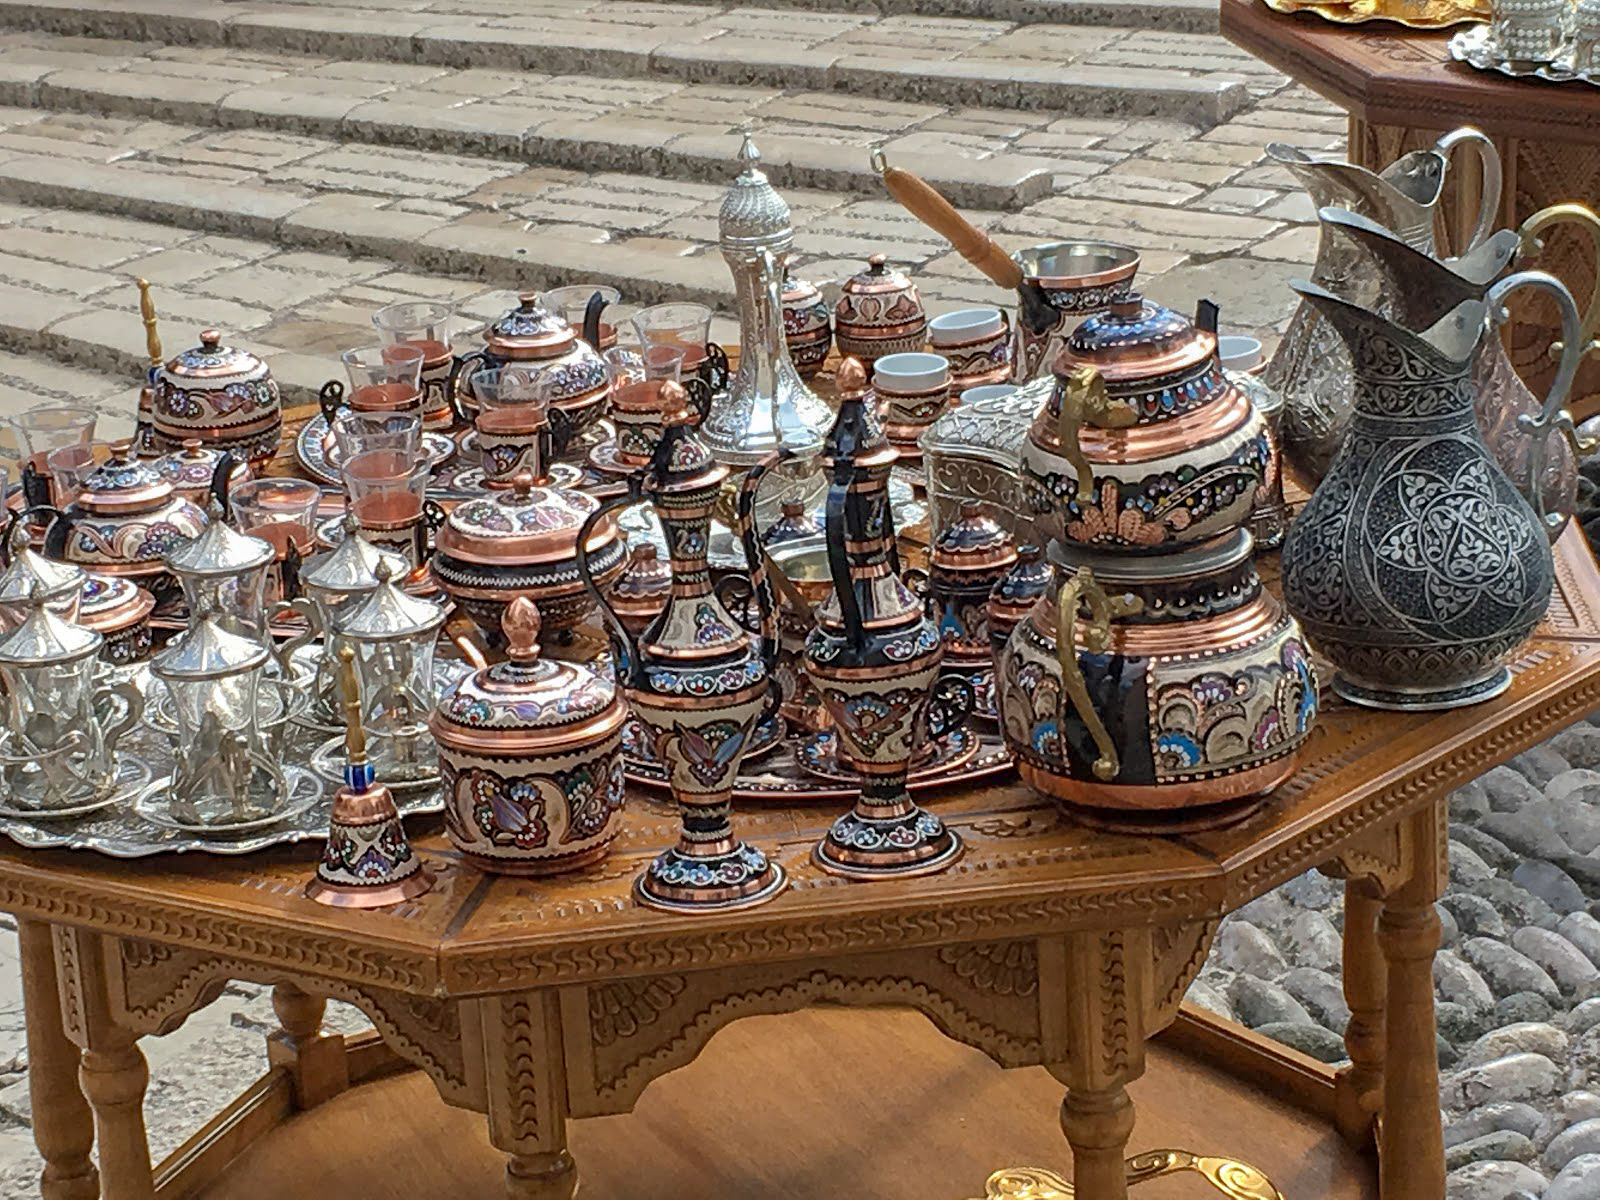 Decorative tea and coffee sets on a wooden table